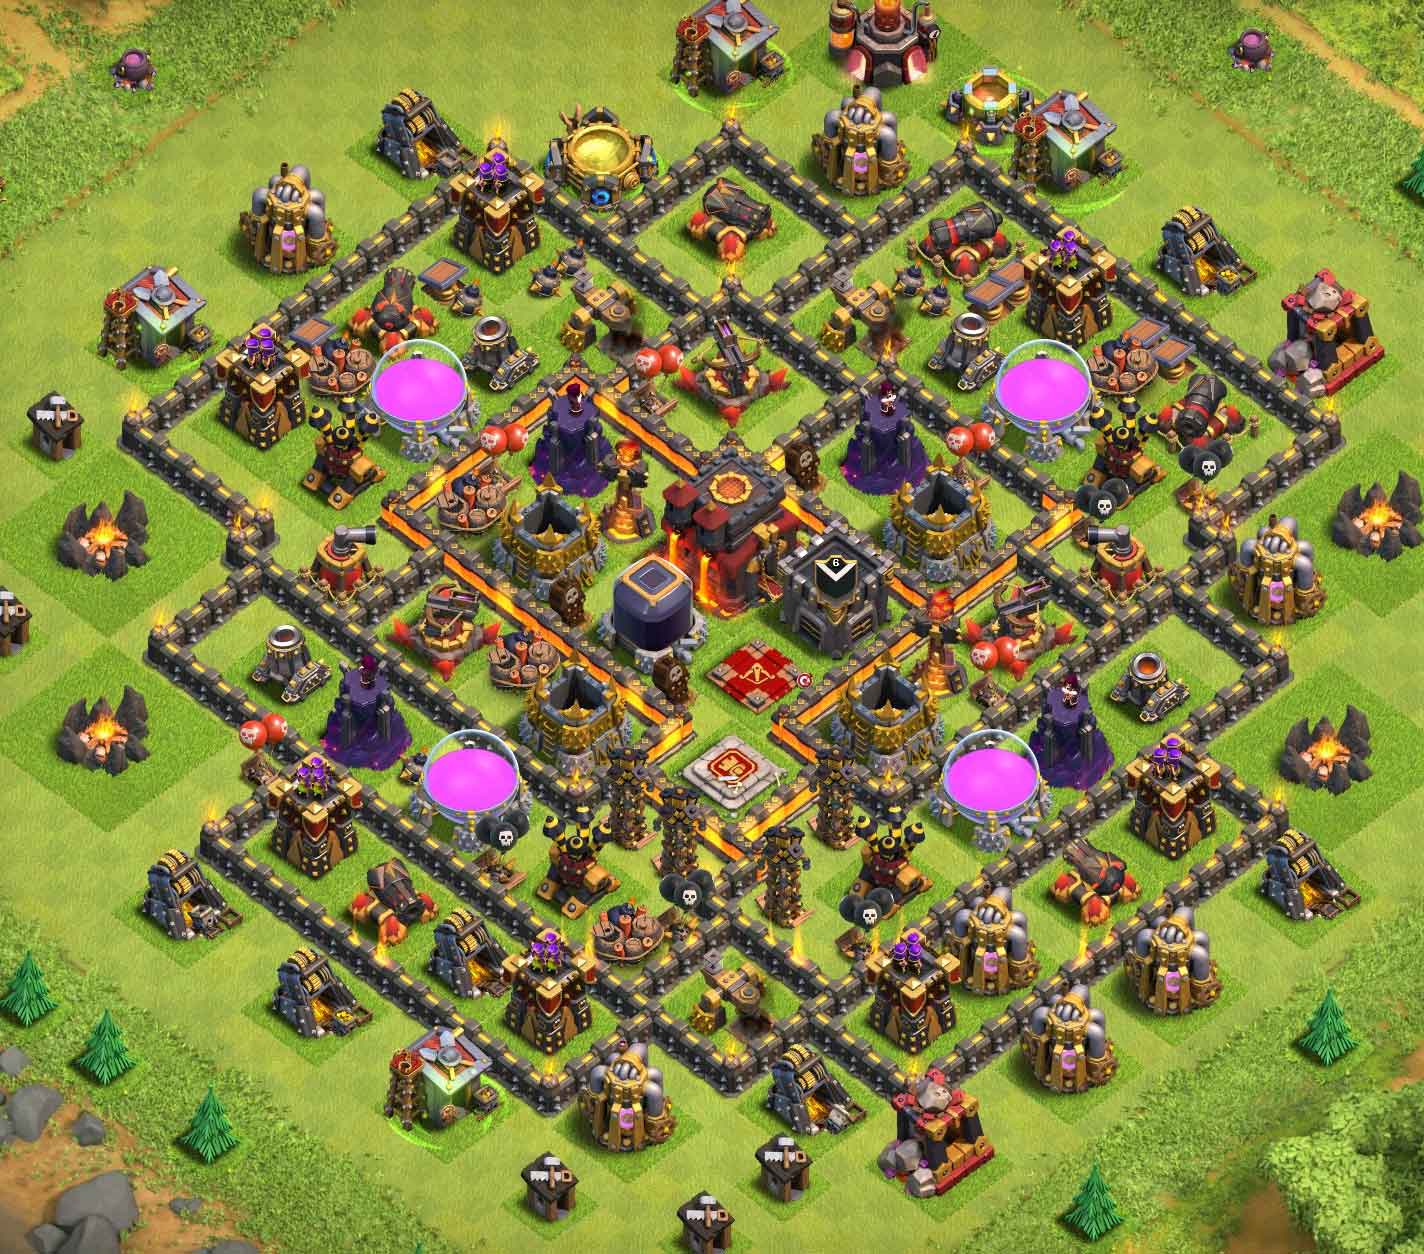 Only Best 12+ Top TH10 Farming Base Designs 2018 Online.